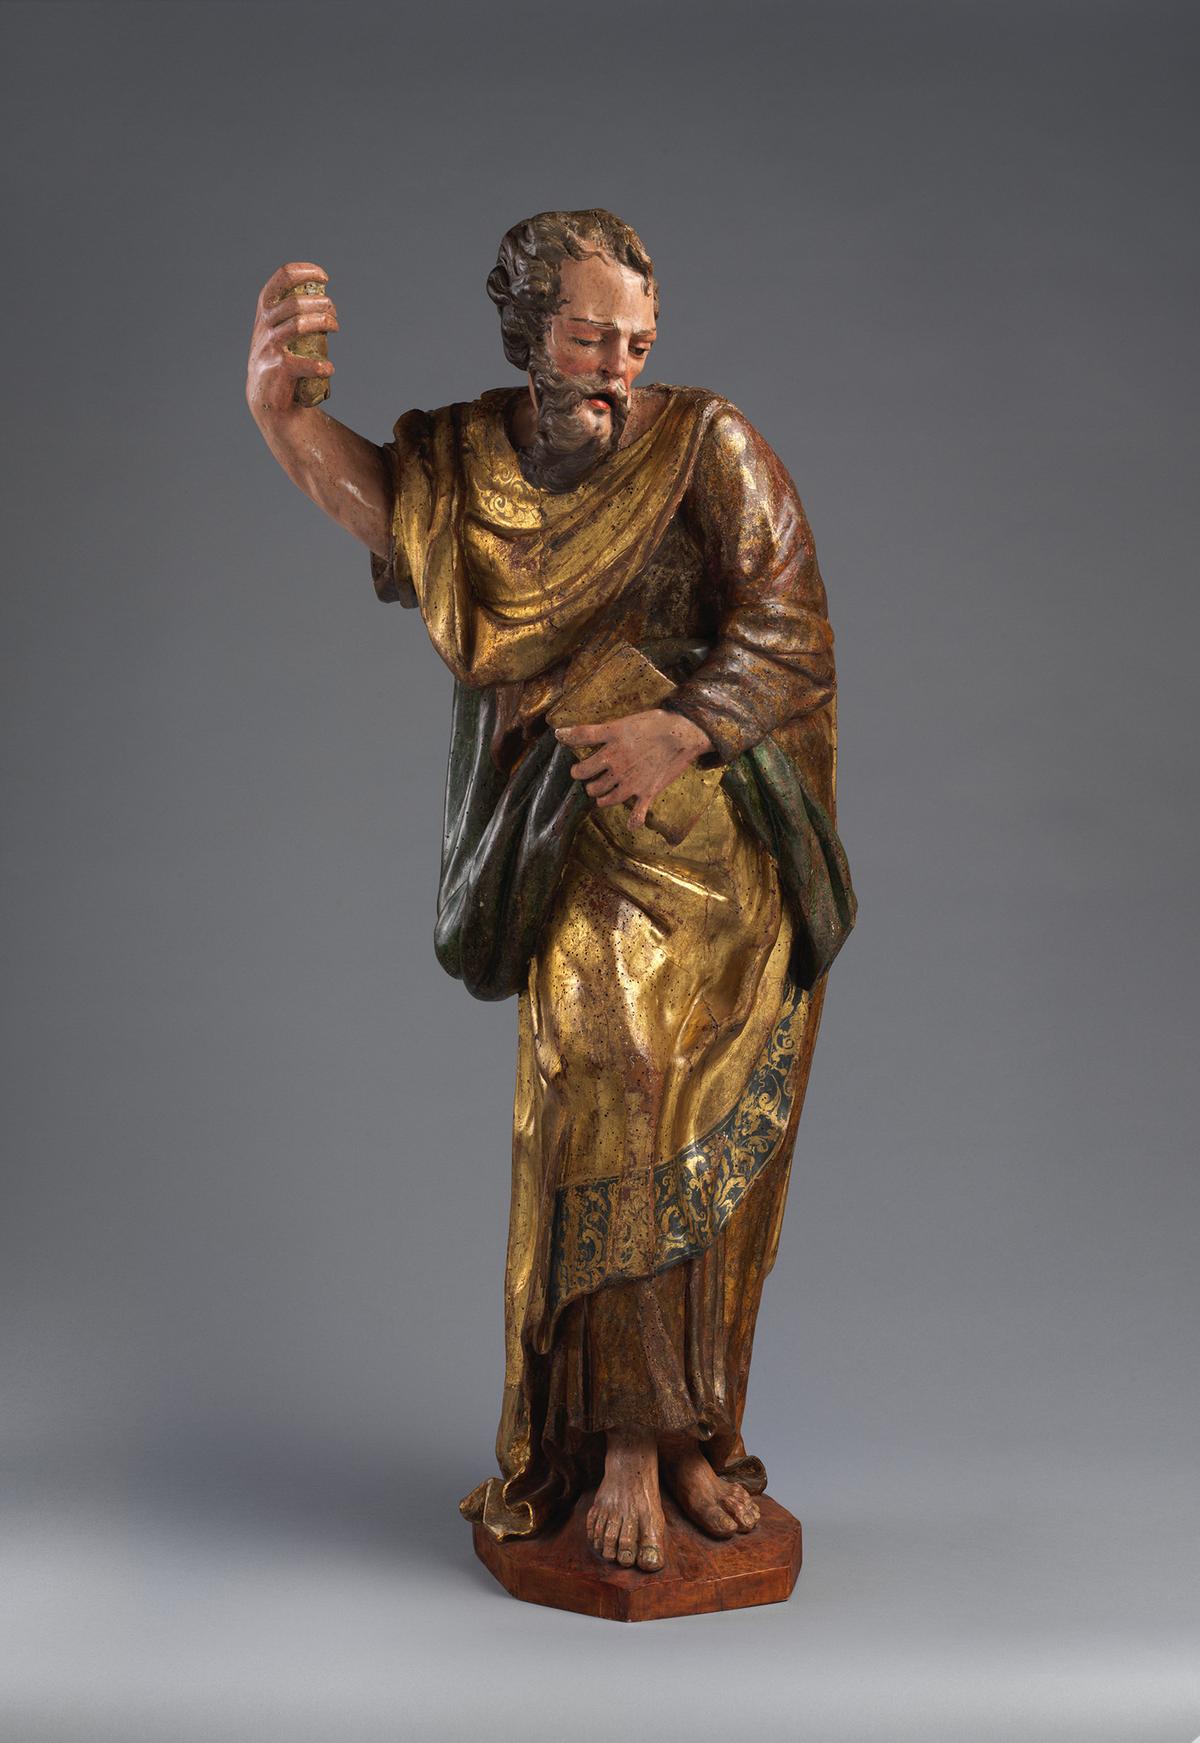 "Apostle or Saint," circa 1520s, by Alonso Berruguete. Polychrome and gilt walnut; 40 9/16 inches by 14 9/16 inches. The Metropolitan Museum of Art, New York. (Public Domain)